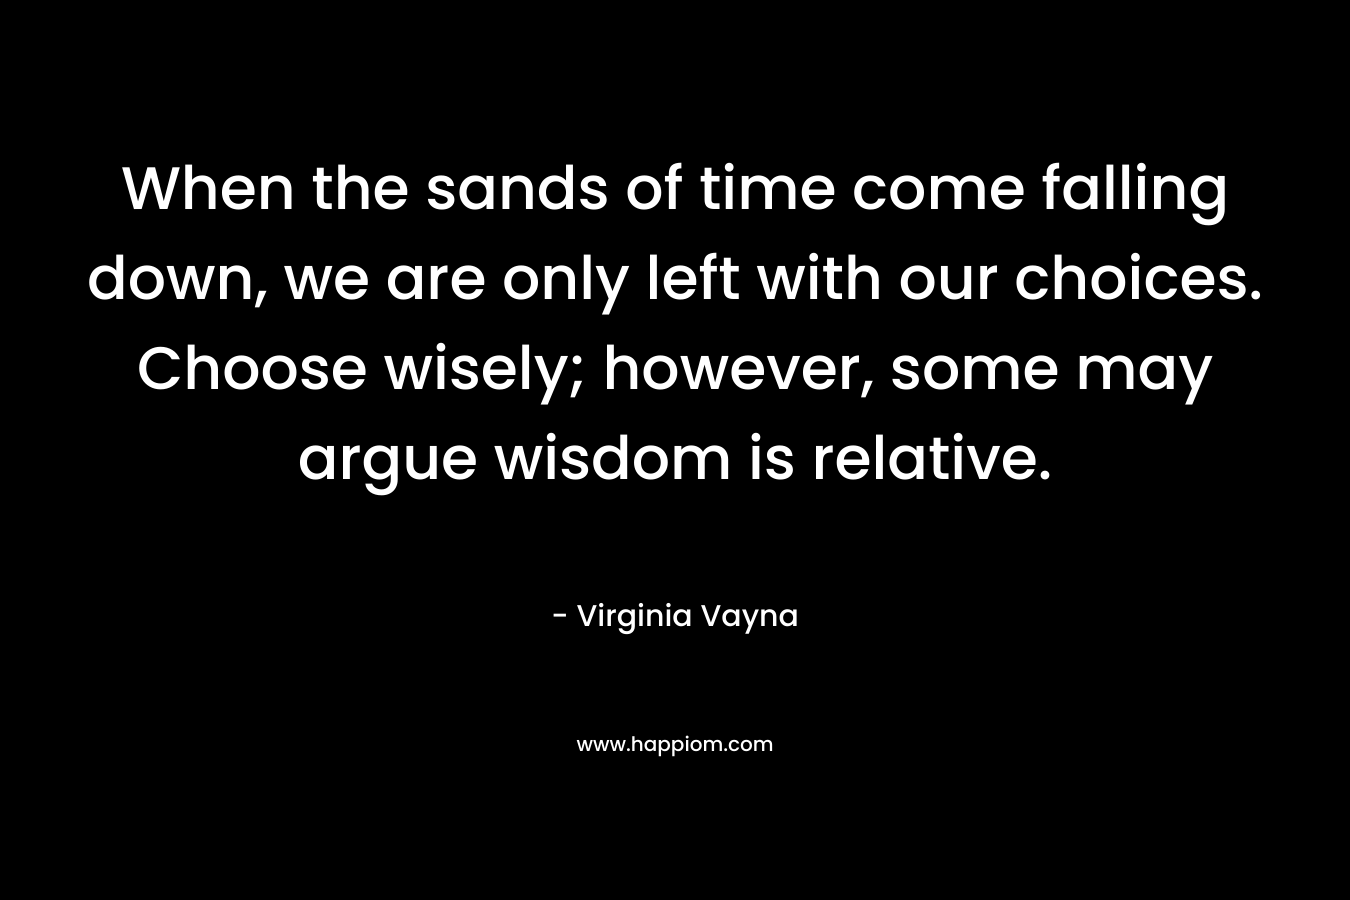 When the sands of time come falling down, we are only left with our choices. Choose wisely; however, some may argue wisdom is relative.